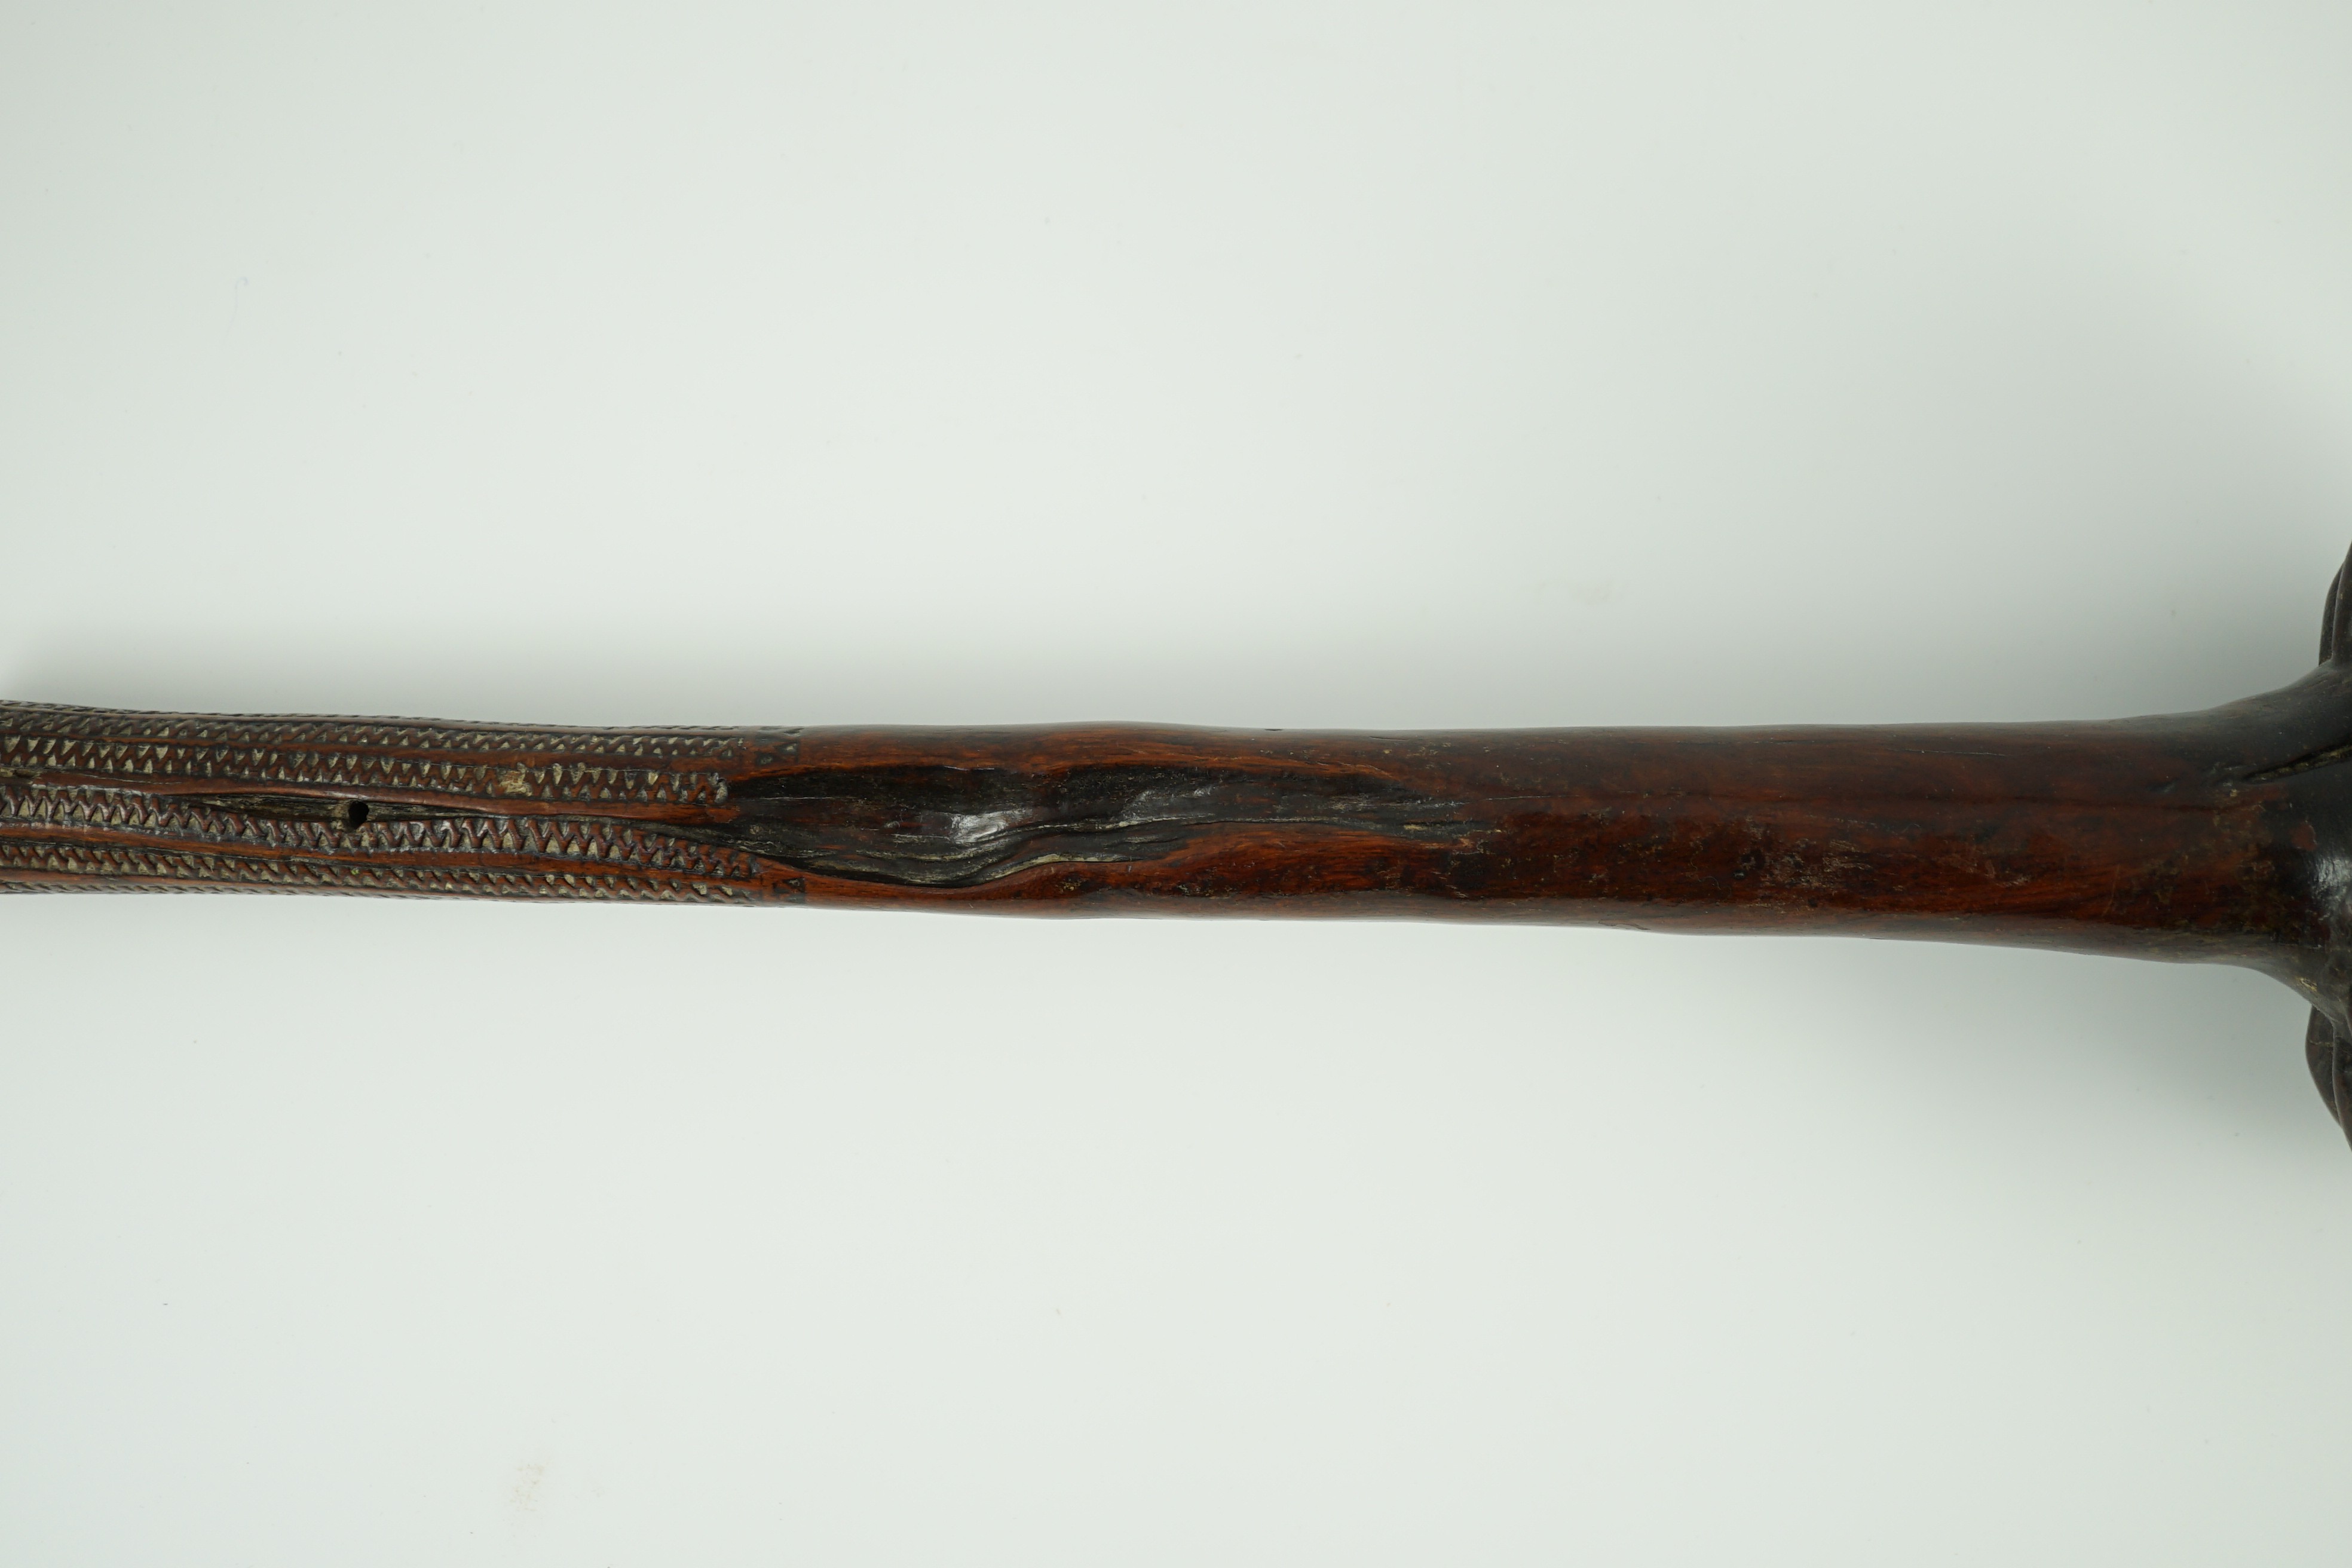 A Fijian hardwood throwing club, with zig-zag relief carved handle and further irregular spotted decoration, 40cm long